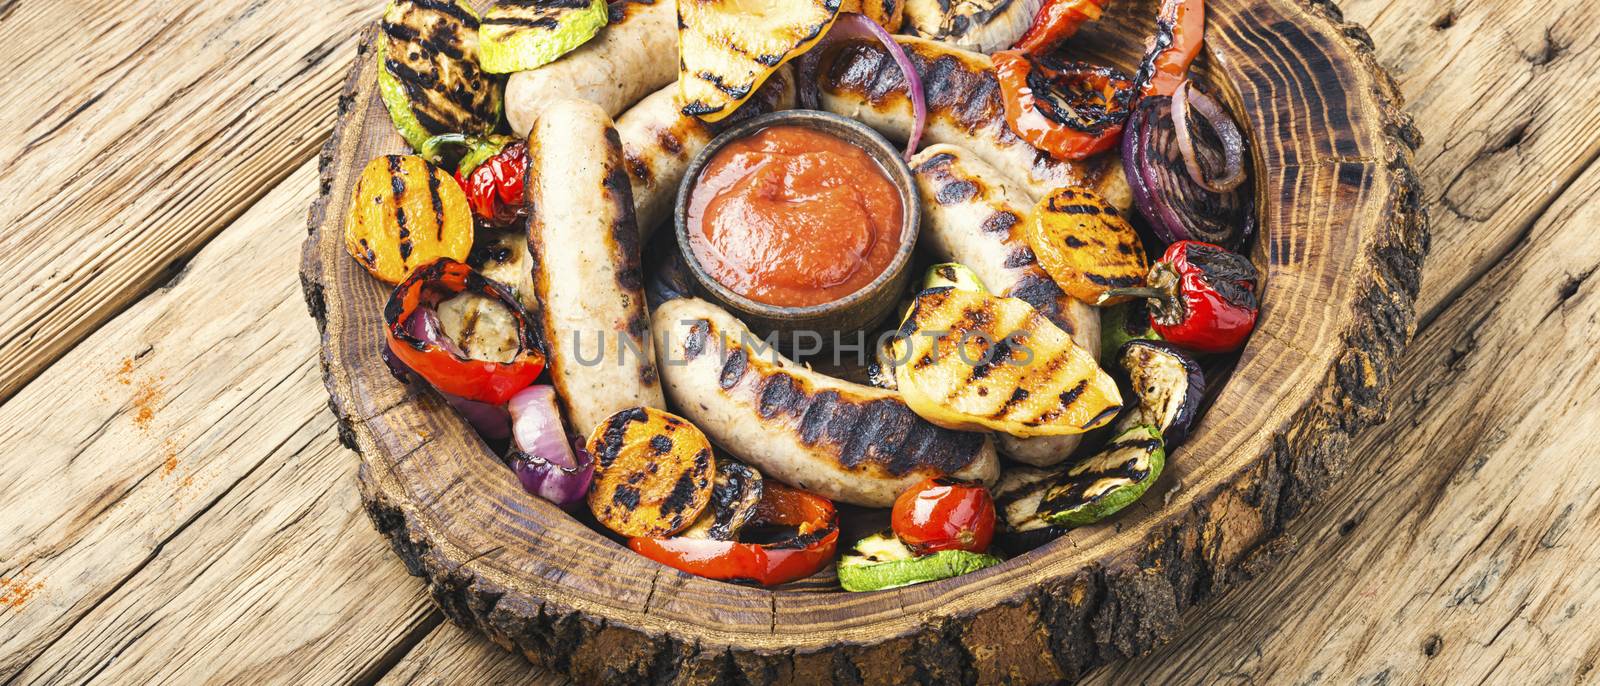 Grilled sausages with vegetables by LMykola